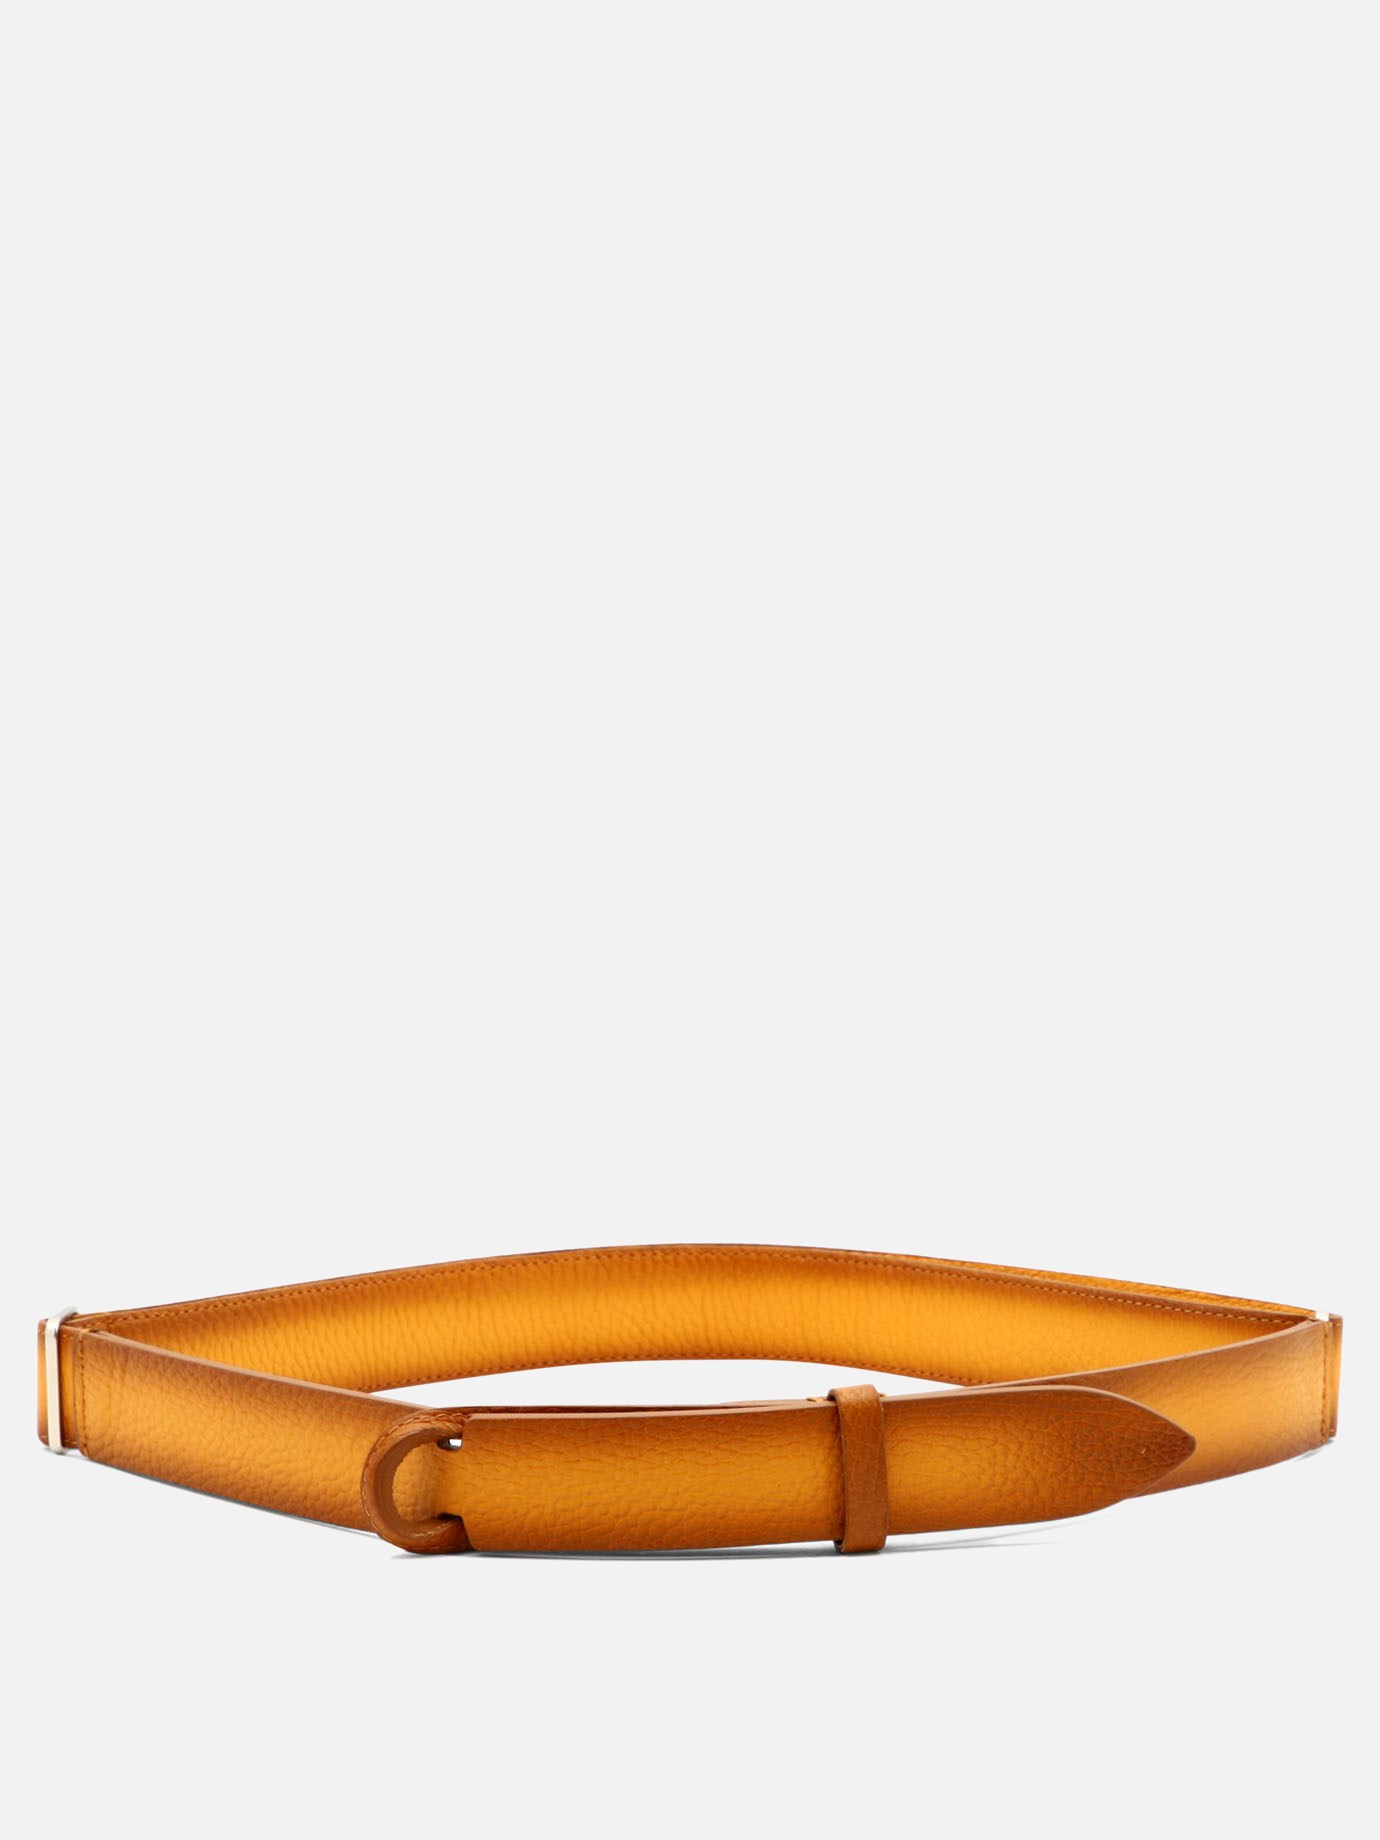  Nobuckle  belt by Orciani